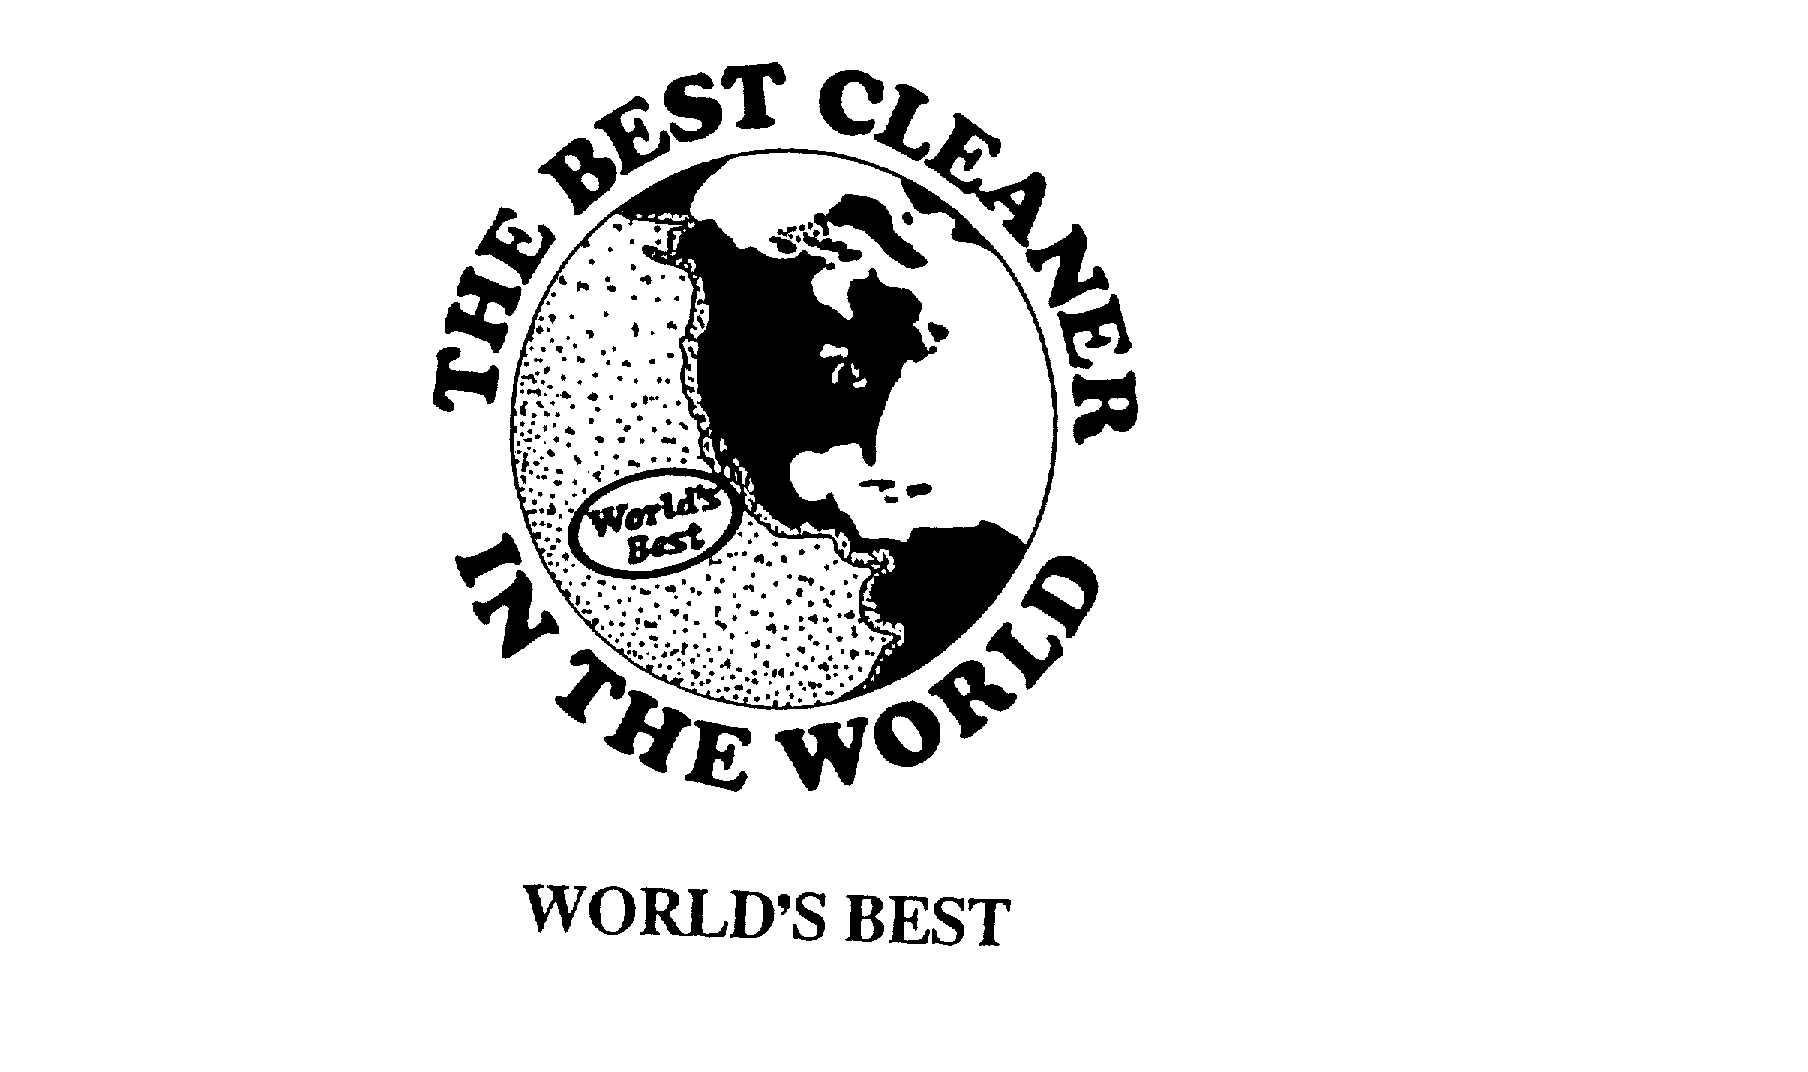  THE BEST CLEANER IN THE WORLD WORLD'S BEST